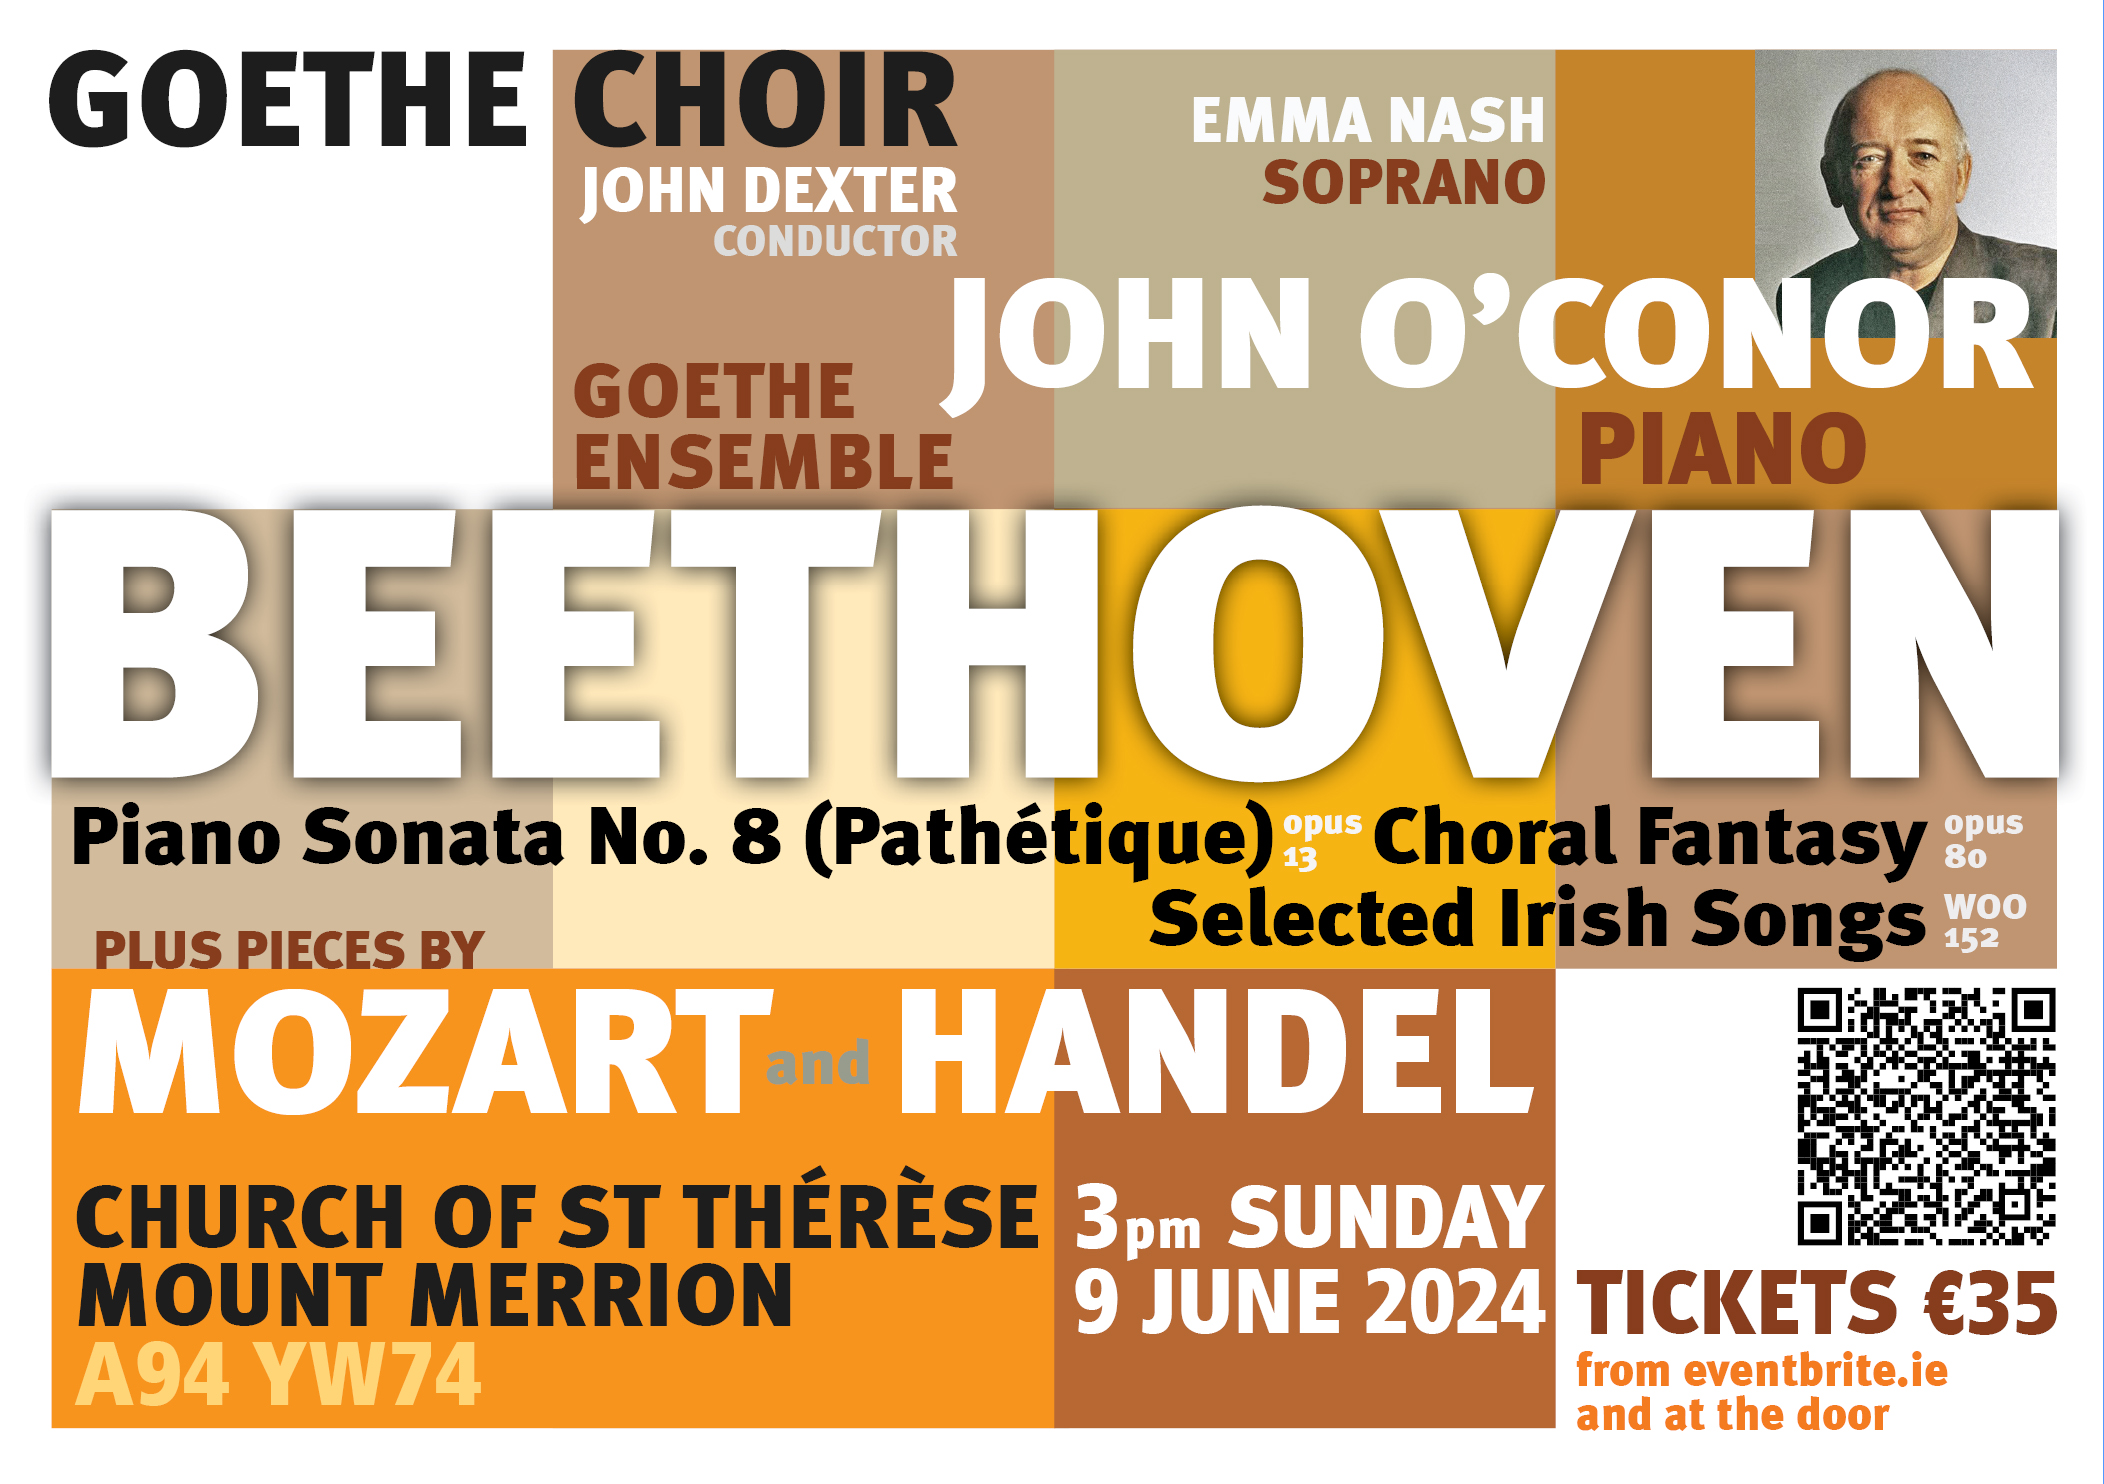 BEETHOVEN’S CHORAL FANTASY WITH PIANIST JOHN O’CONOR AND GOETHE CHOIR